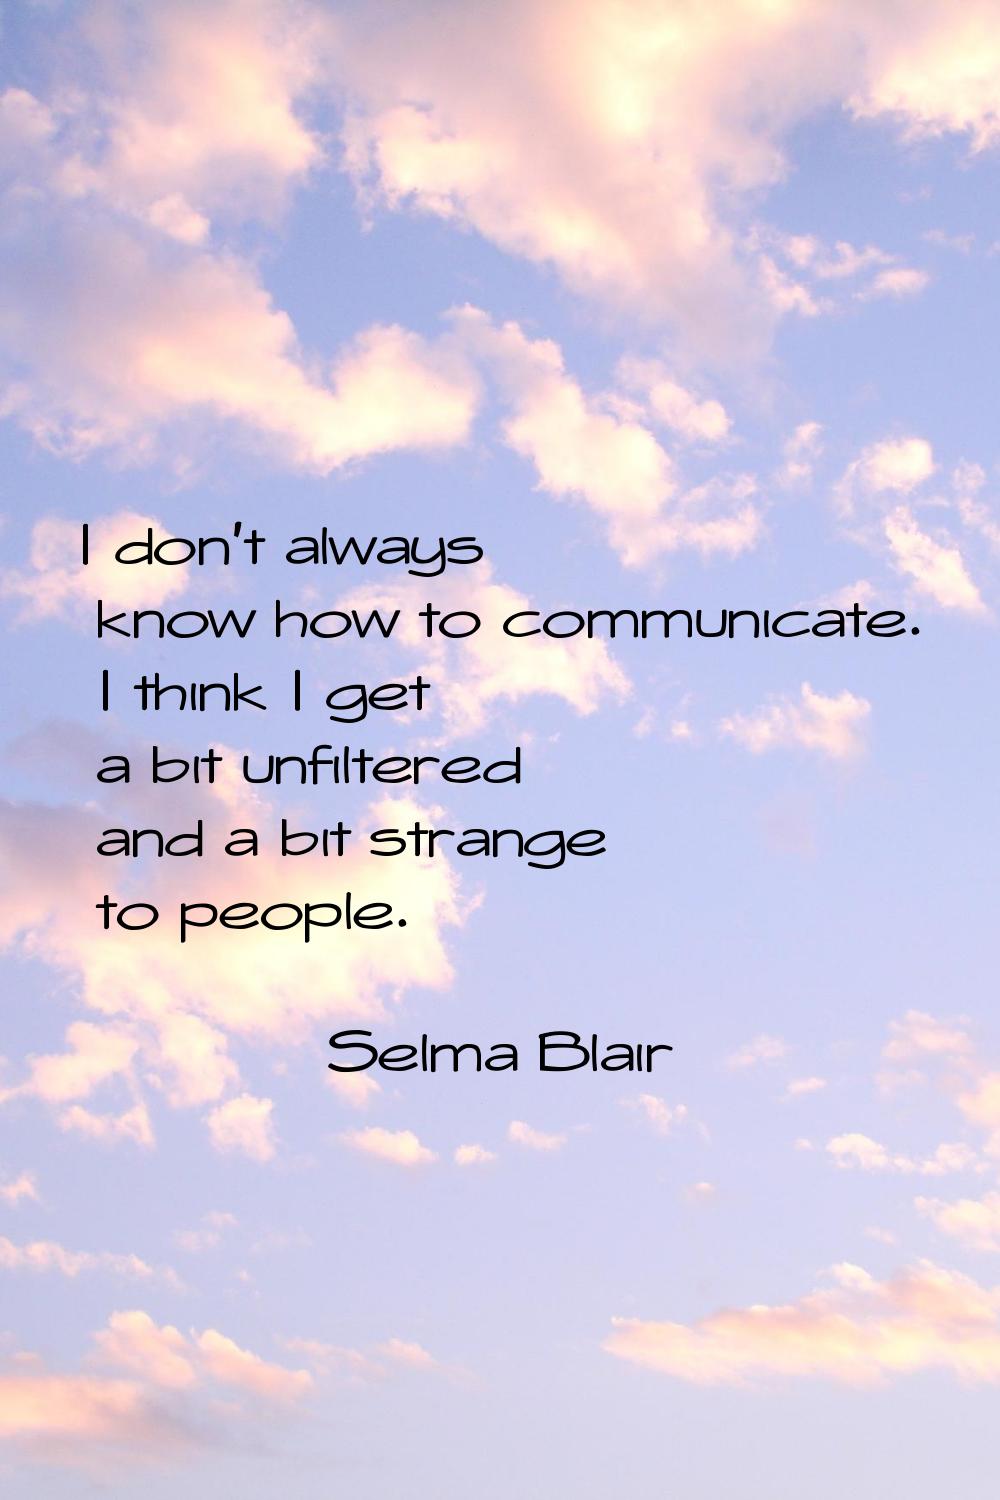 I don't always know how to communicate. I think I get a bit unfiltered and a bit strange to people.